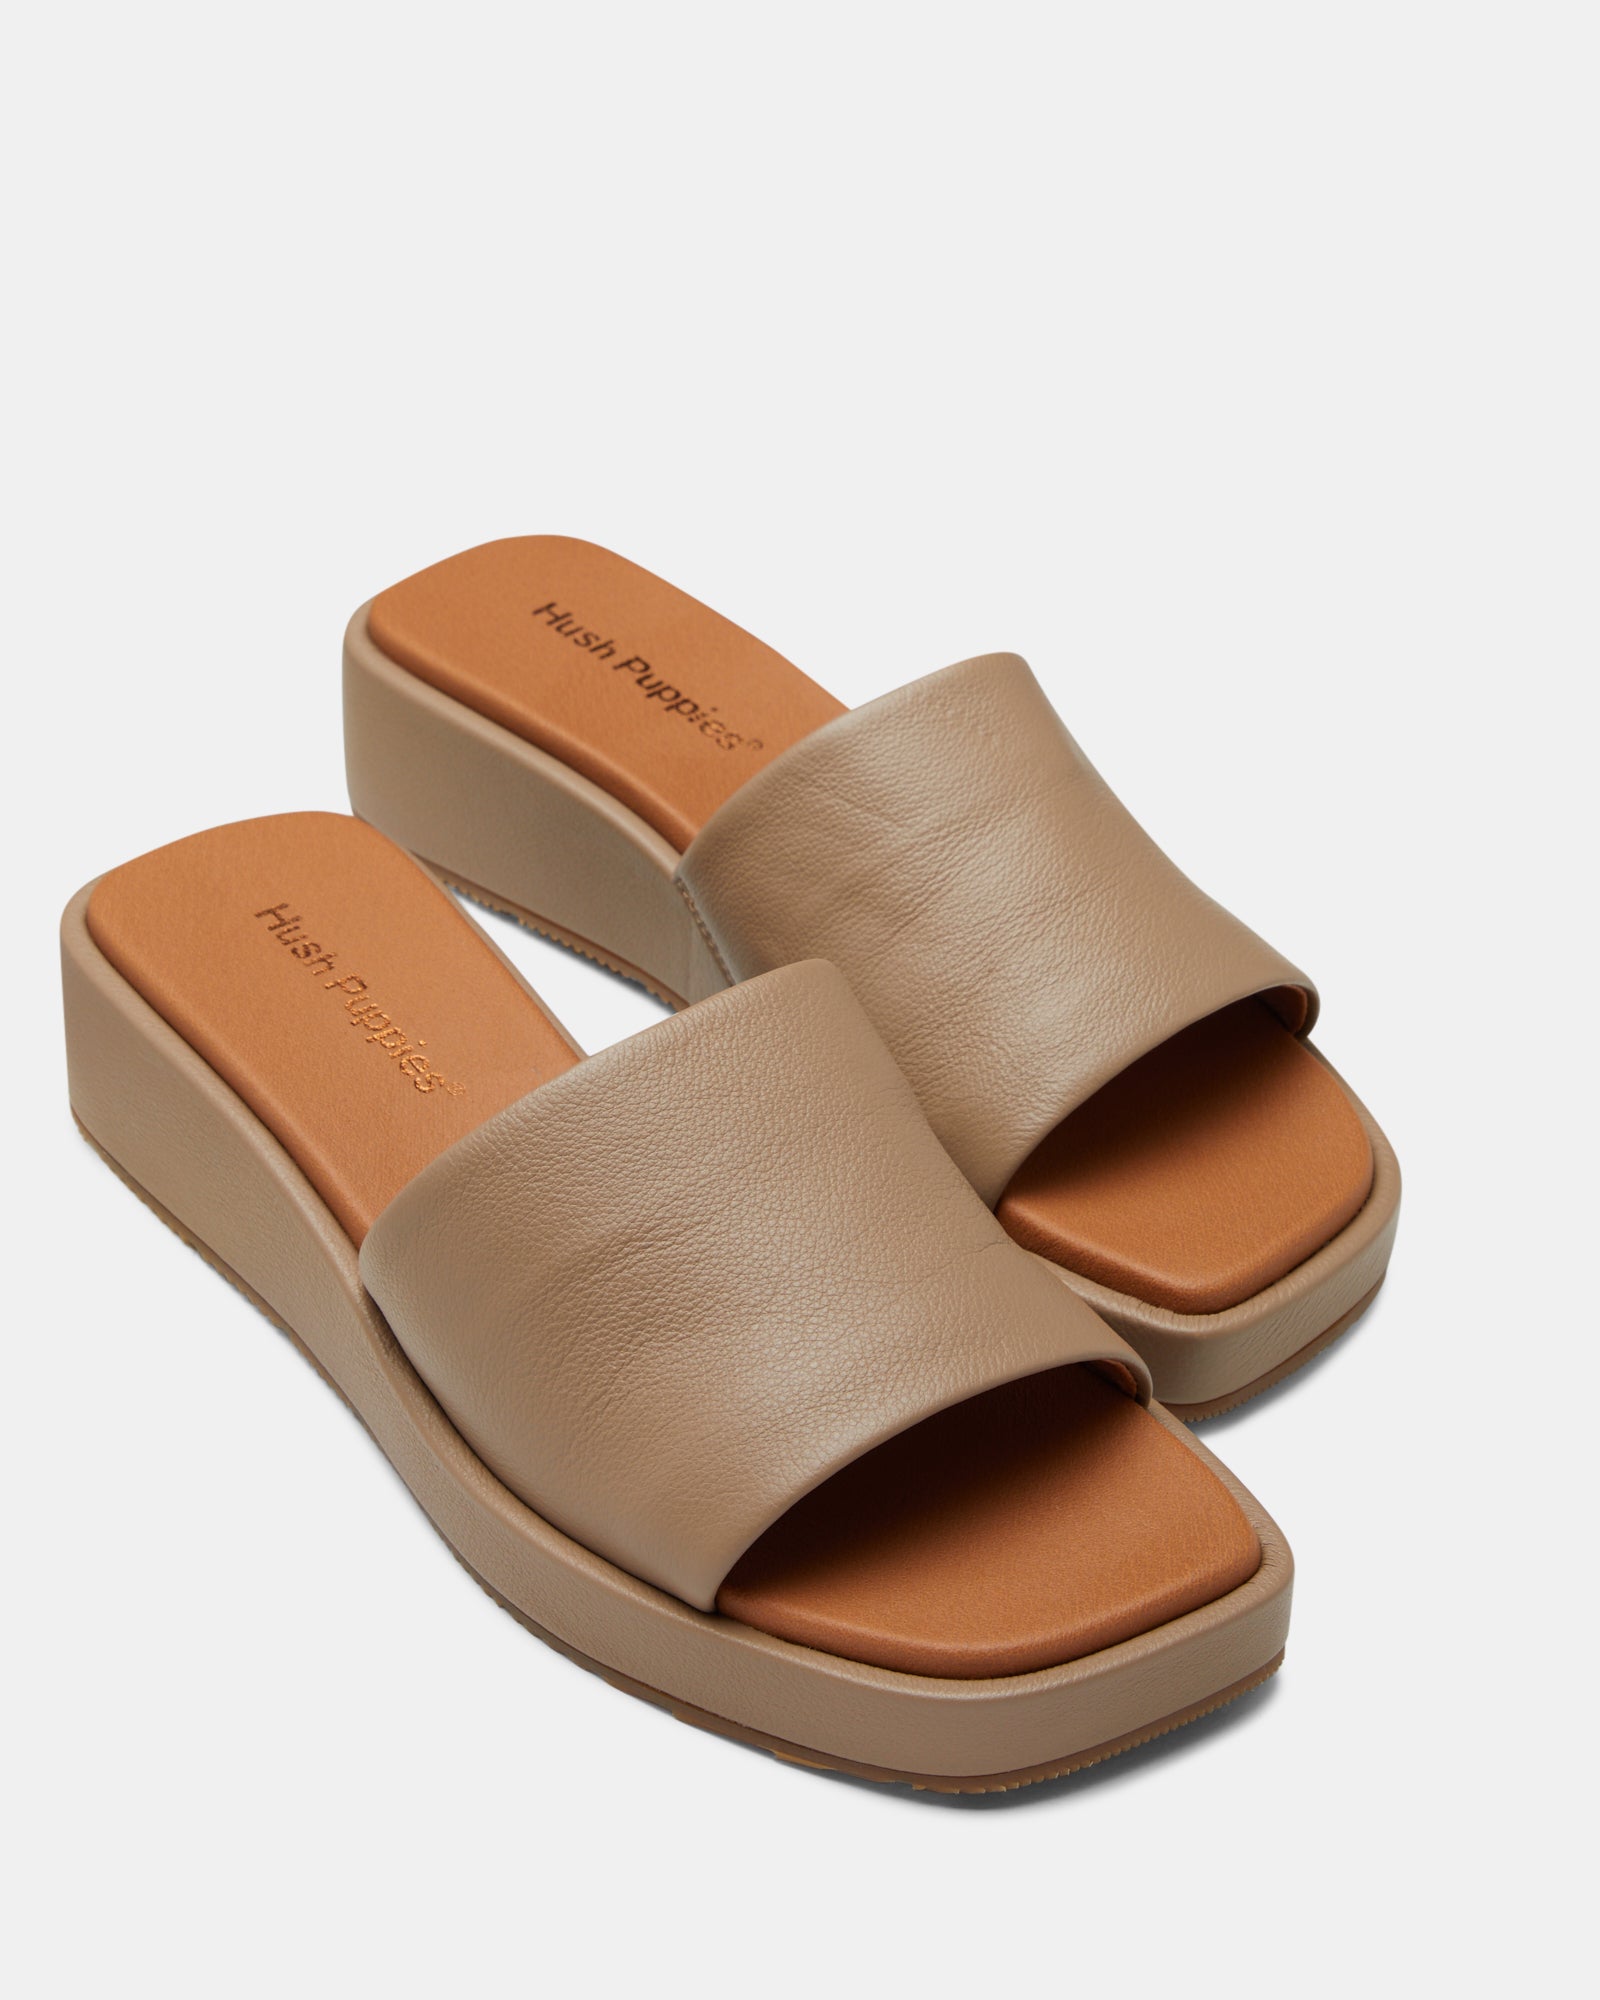 dreamer sandals with durable suede upper | mahabis - mahabis